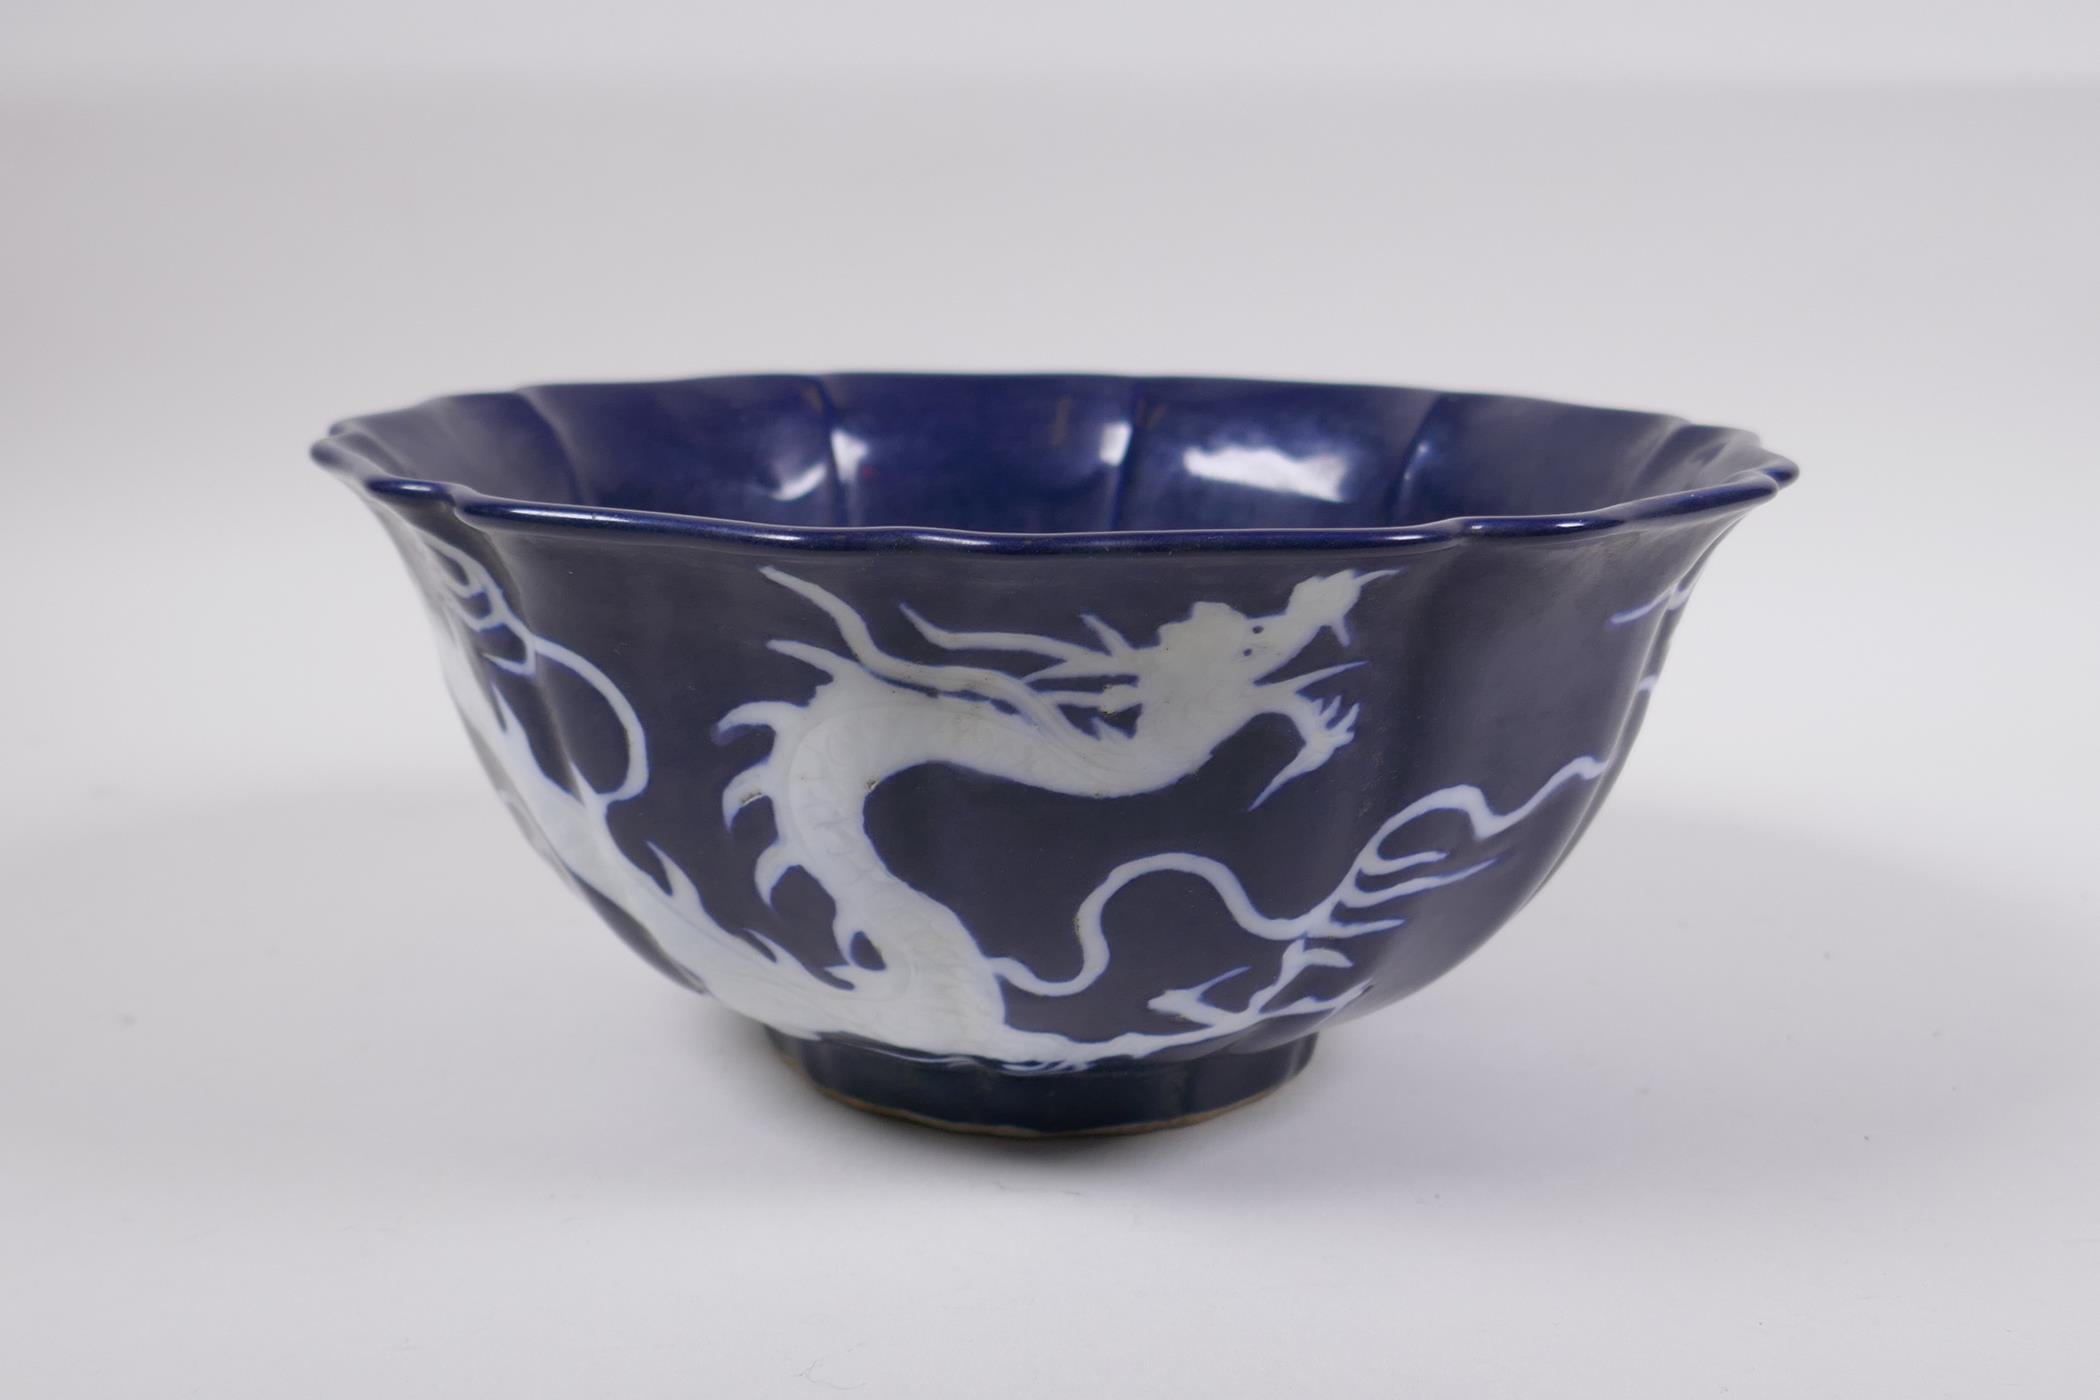 A Chinese blue and white porcelain steep sided bowl with lobed rim, decorated with a white dragon